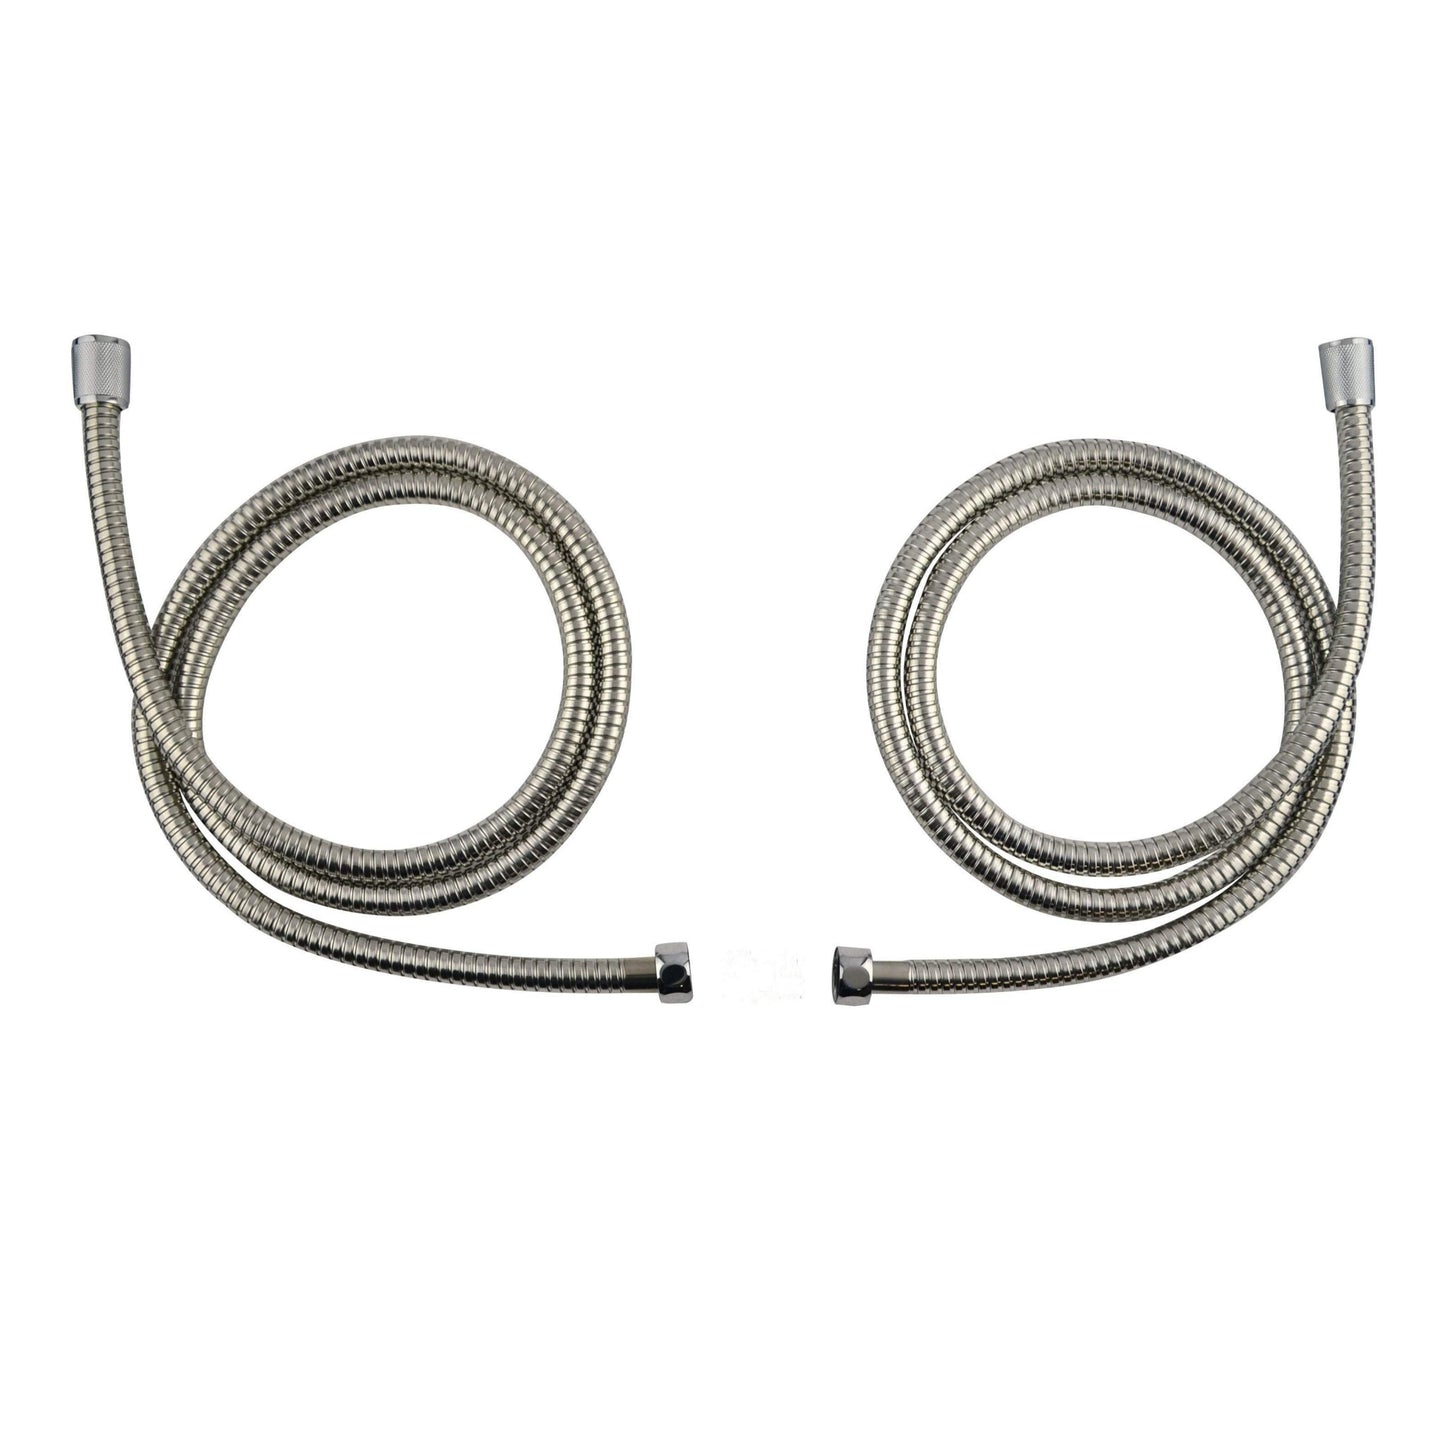 The-Supreme-2x1.5m-Stainless-Steel-Hose